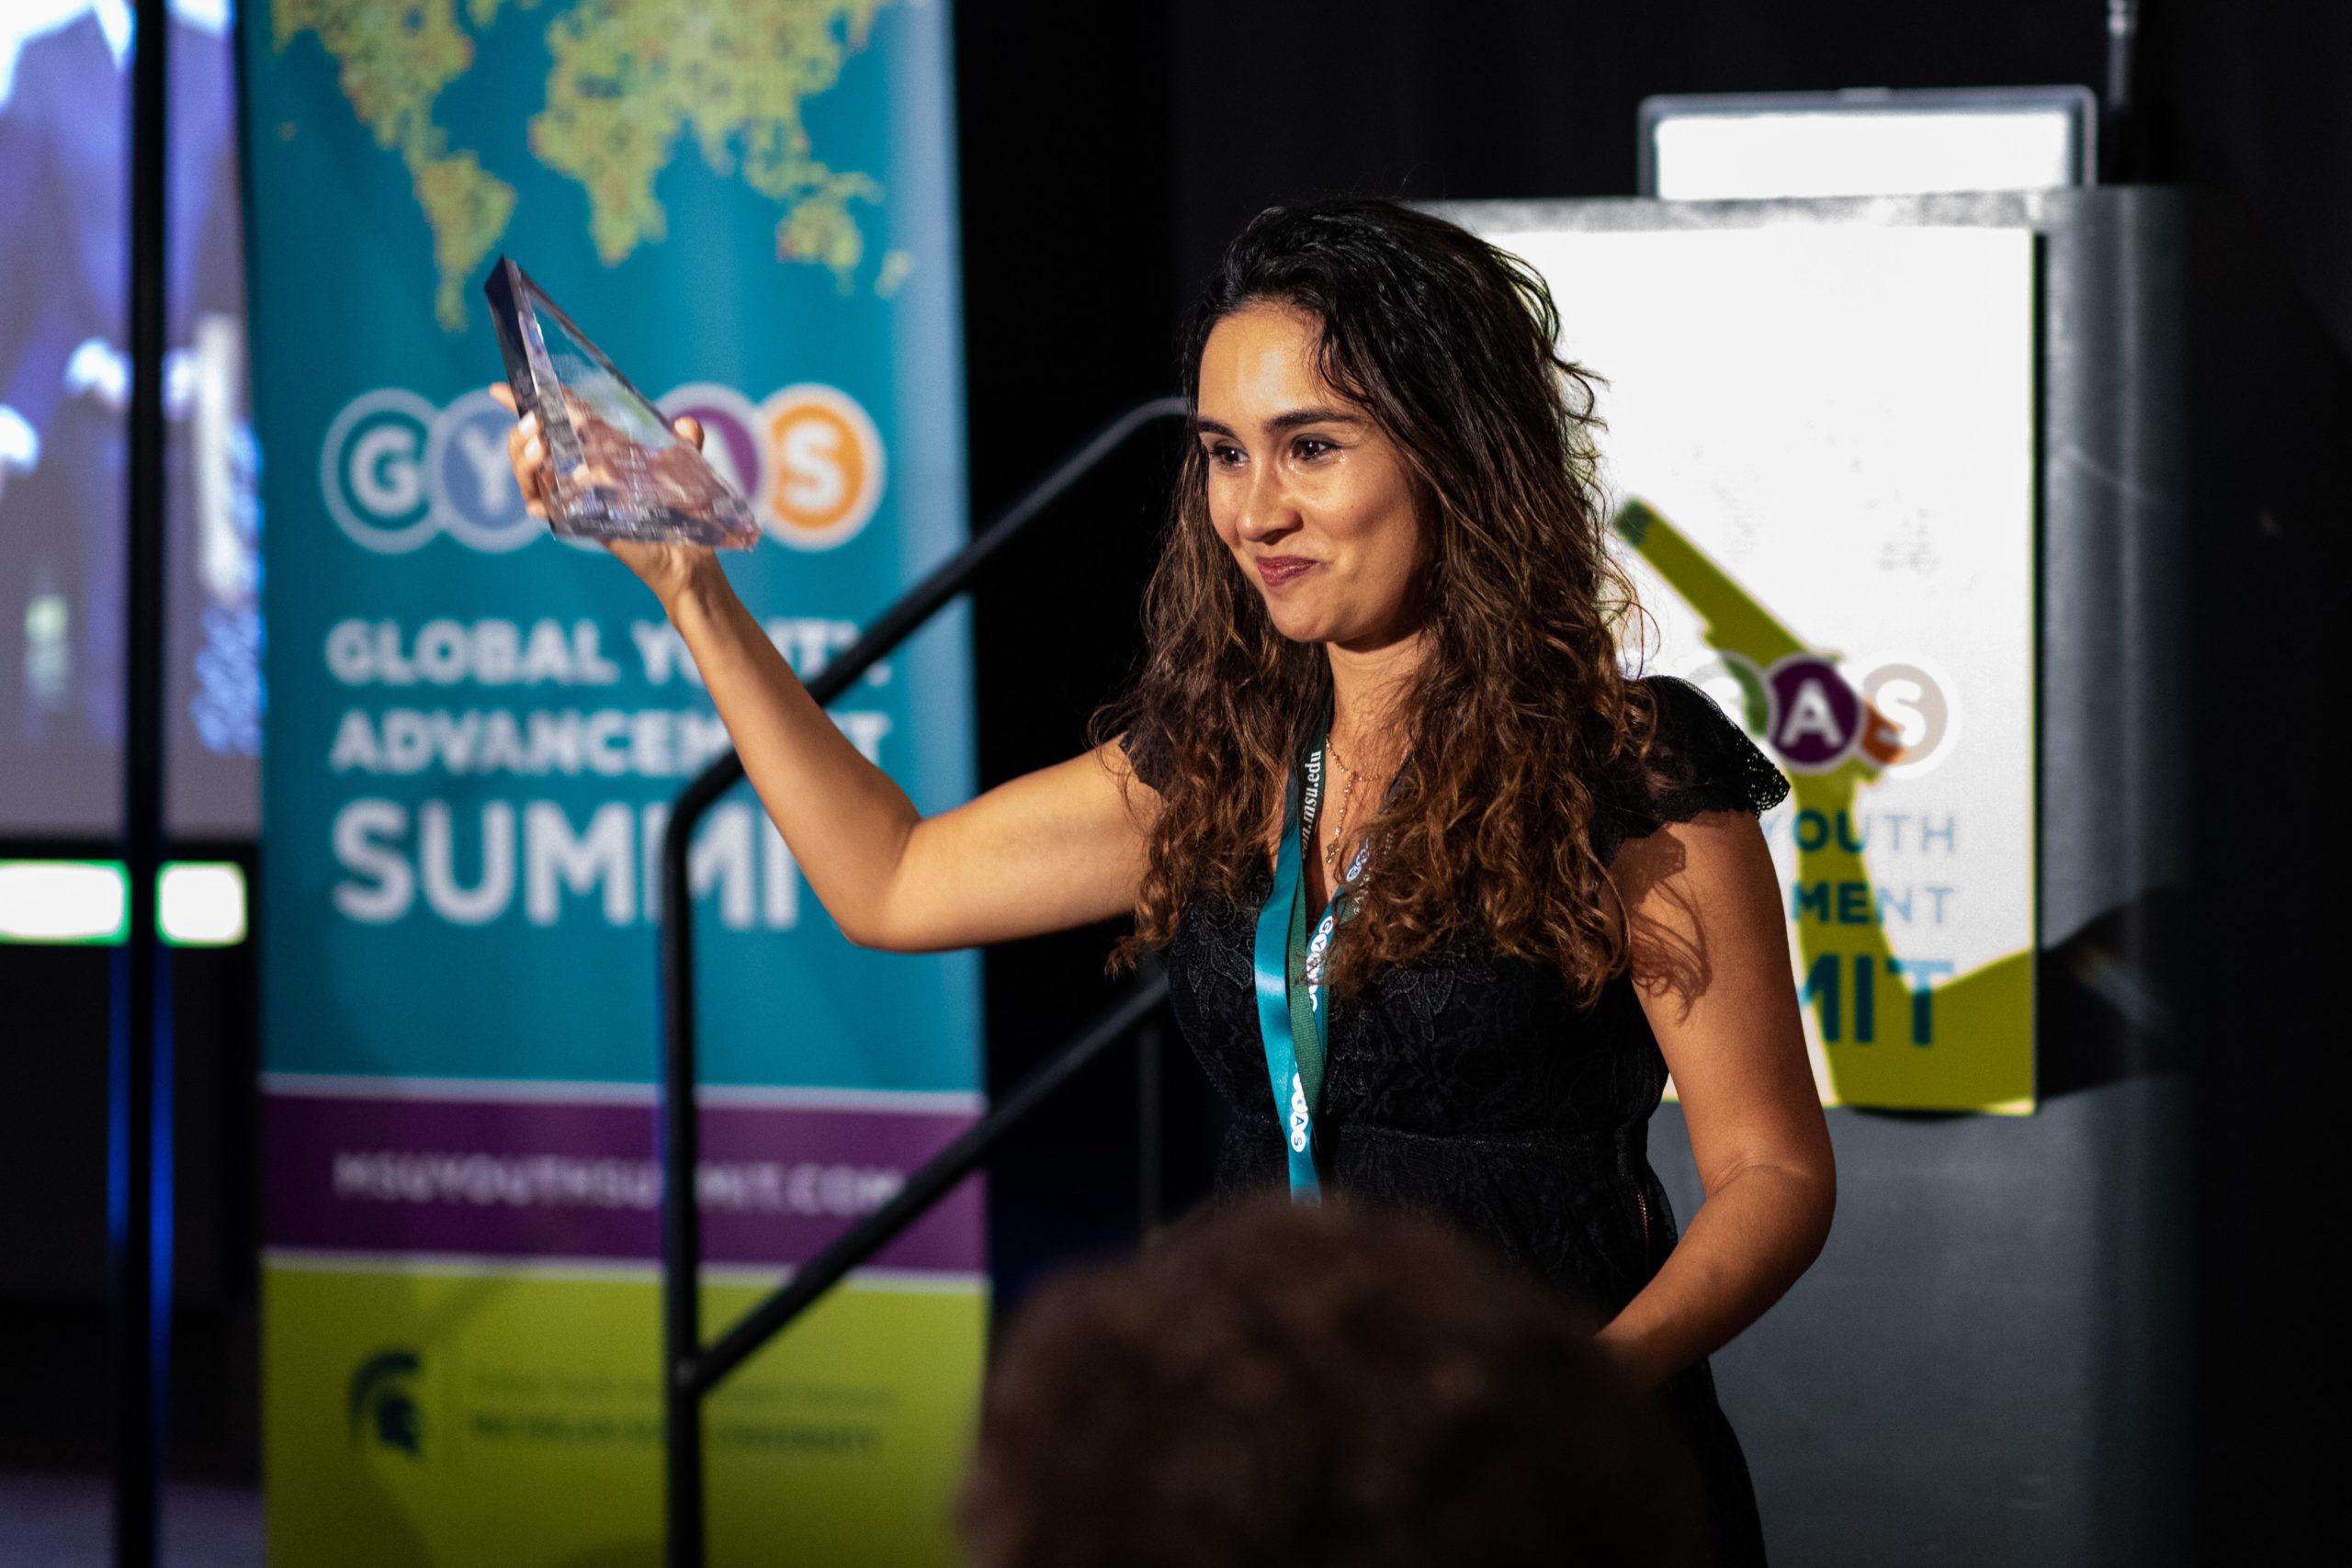 Journalist Beatriz Buarque, founder of the NGO Words Heal the World.